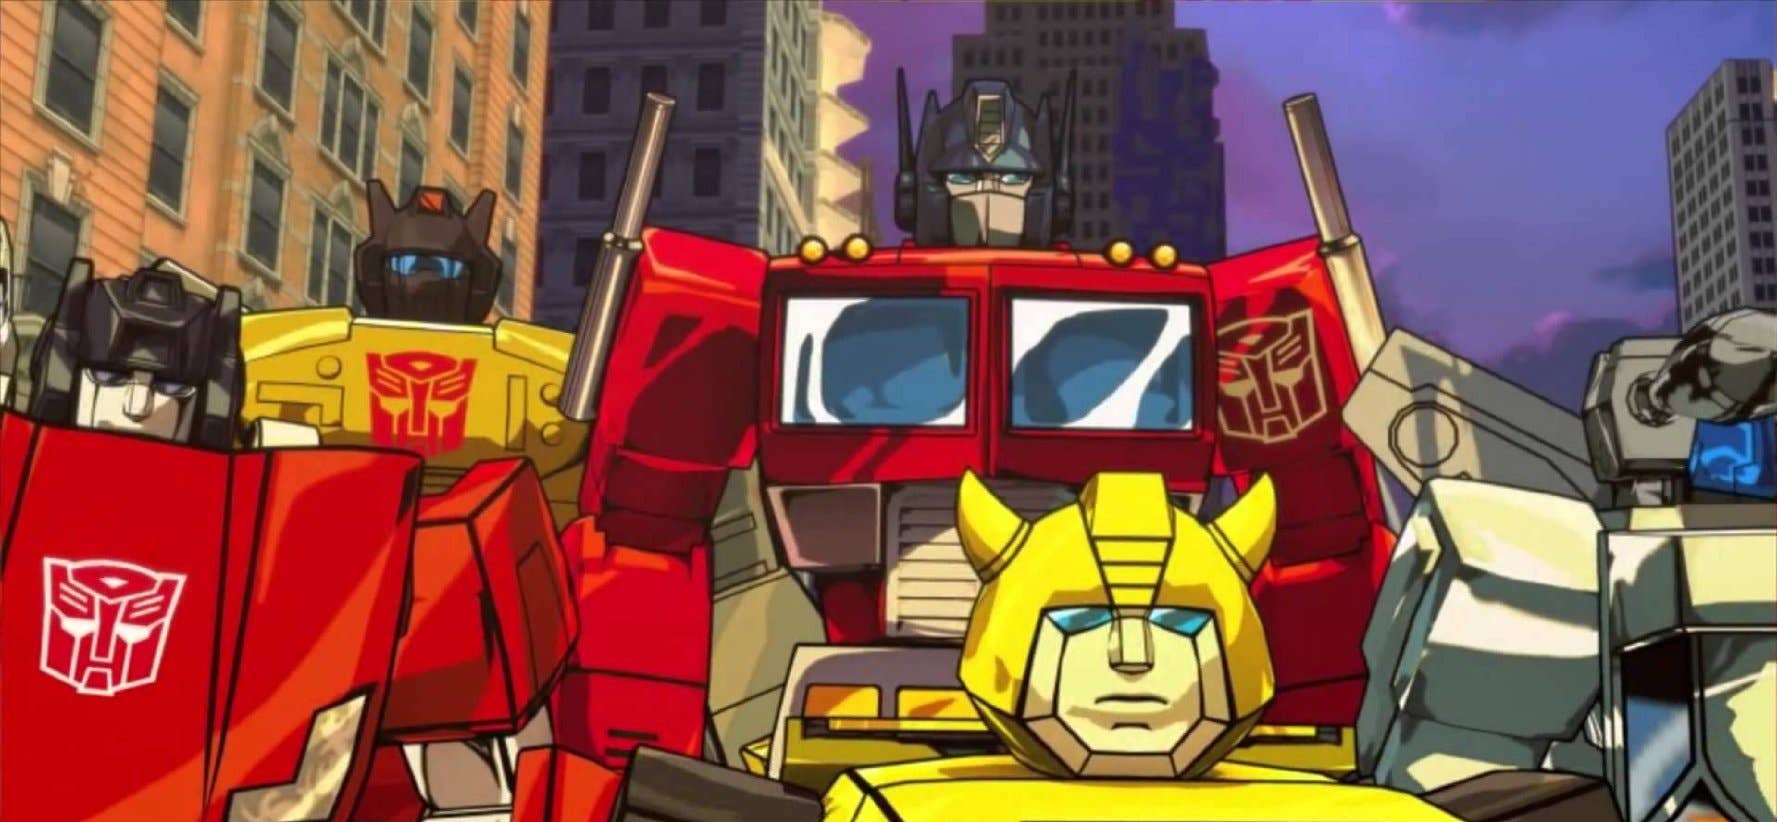 Ranking the characters from the original Transformers animated series